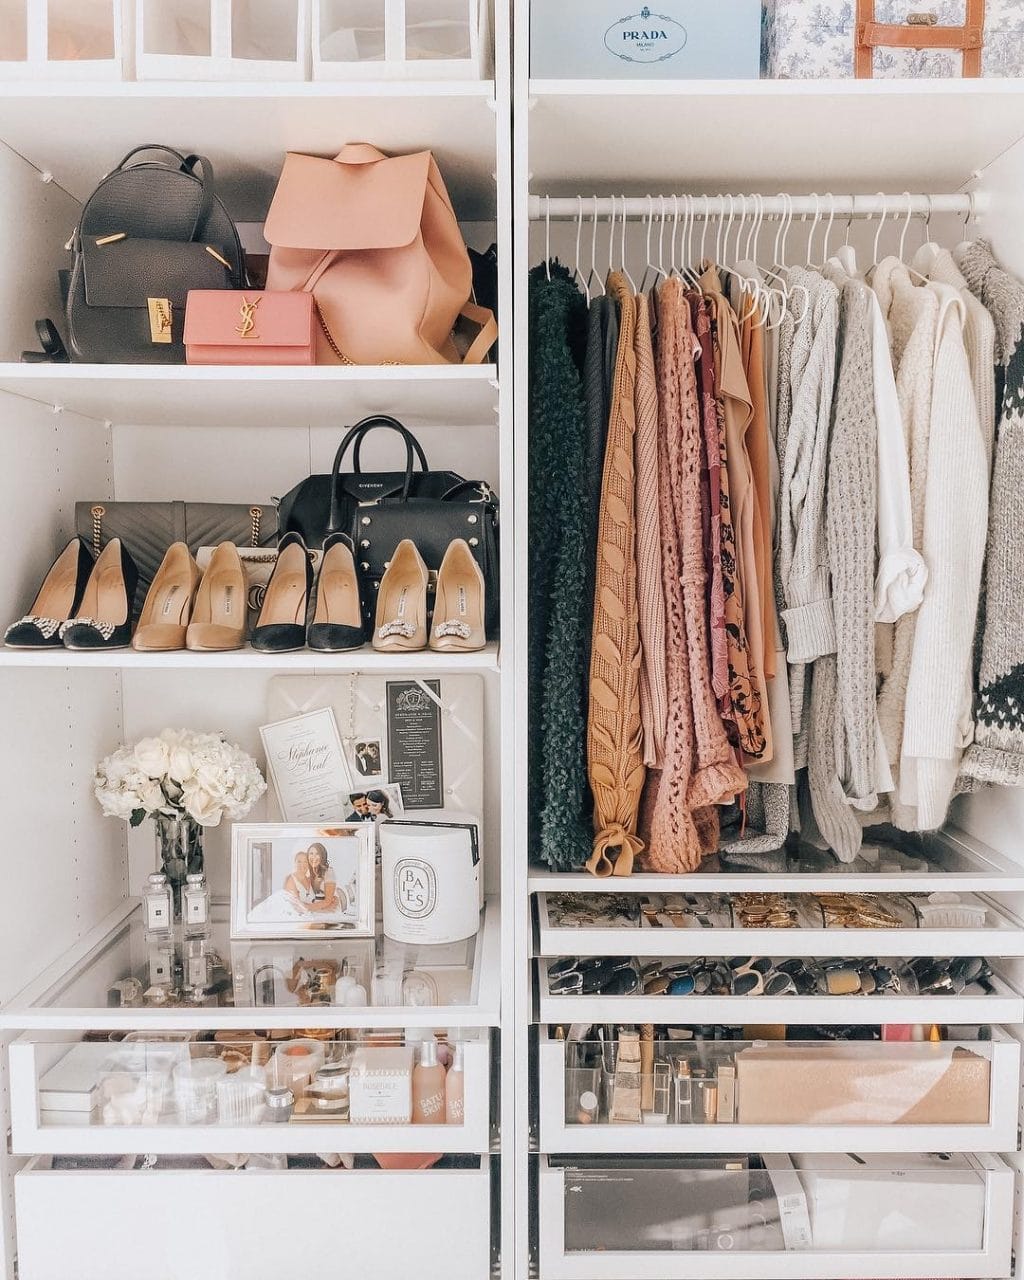 21 Ideas with Ikea Pax Wardrobe System - Sparkles and Shoes